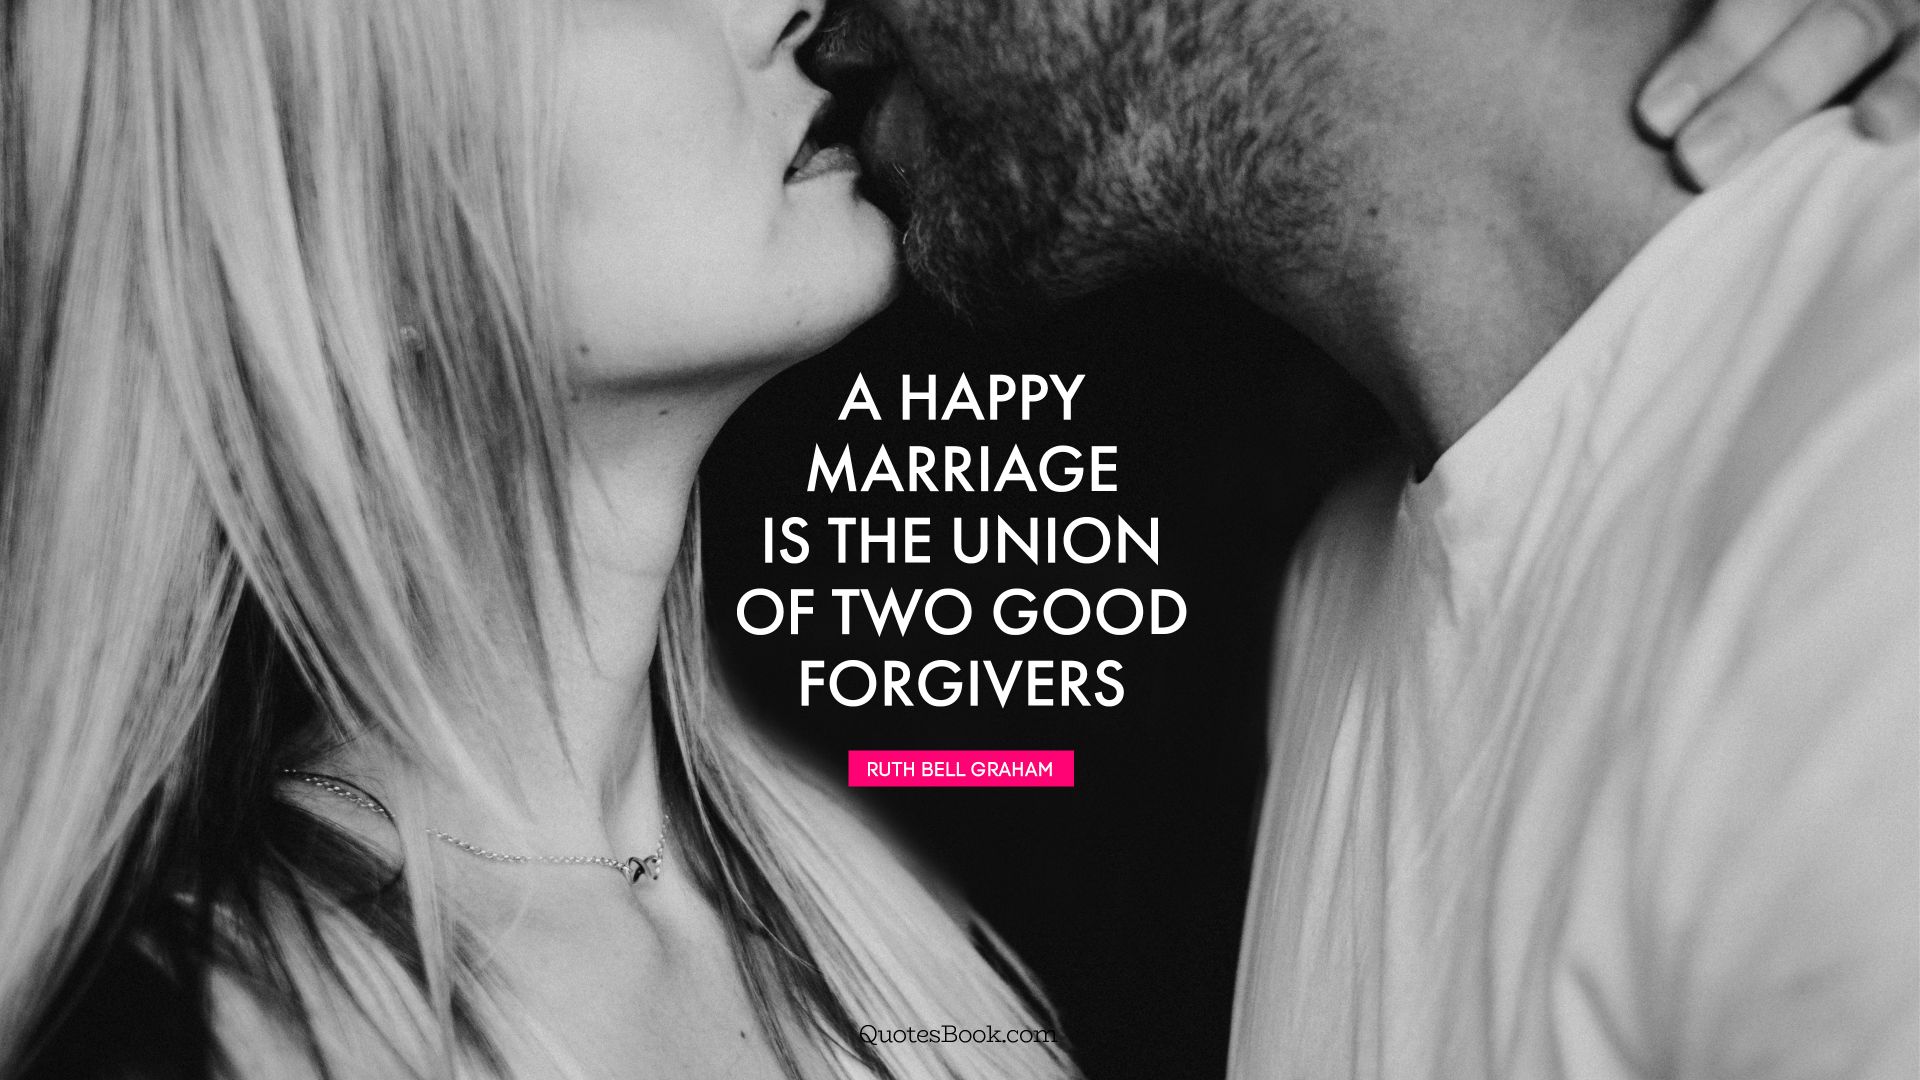 A happy marriage is the union of two good forgivers. - Quote by Ruth Bell Graham